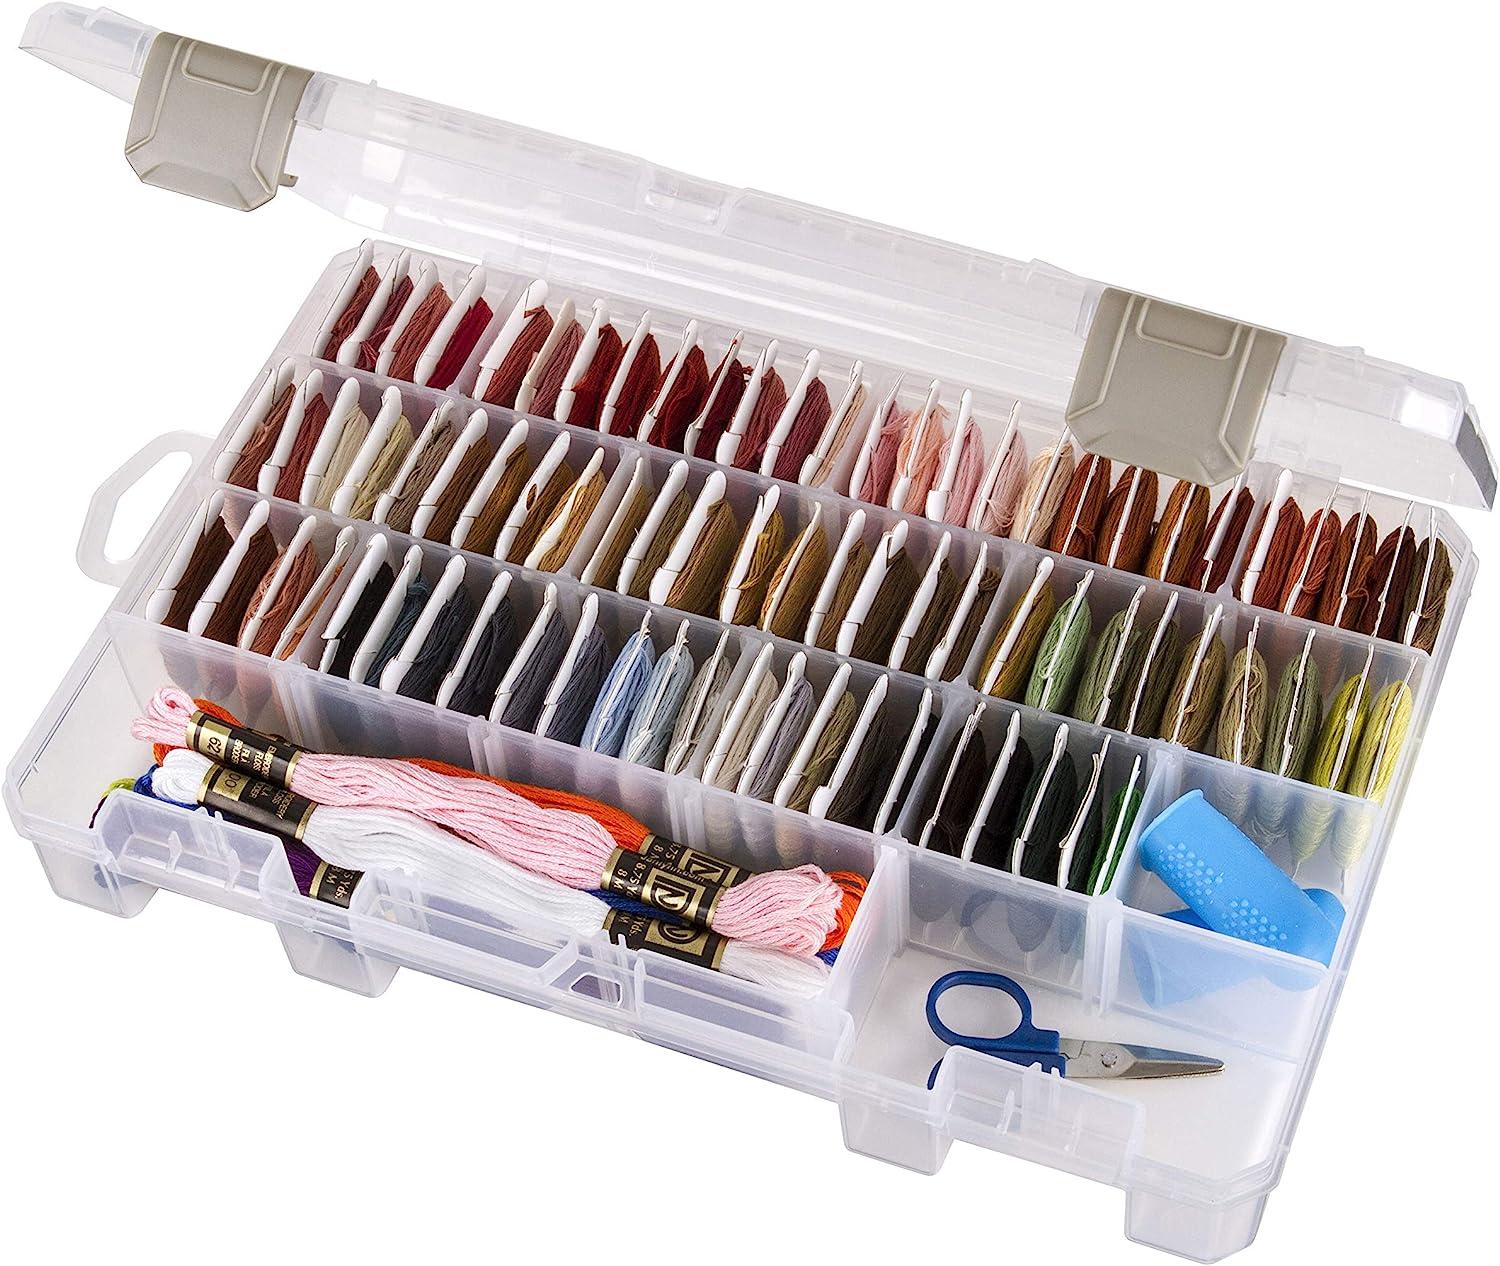 ArtBin 6840JN Floss Finder Box, Sewing & Embroidery Organizer, 1